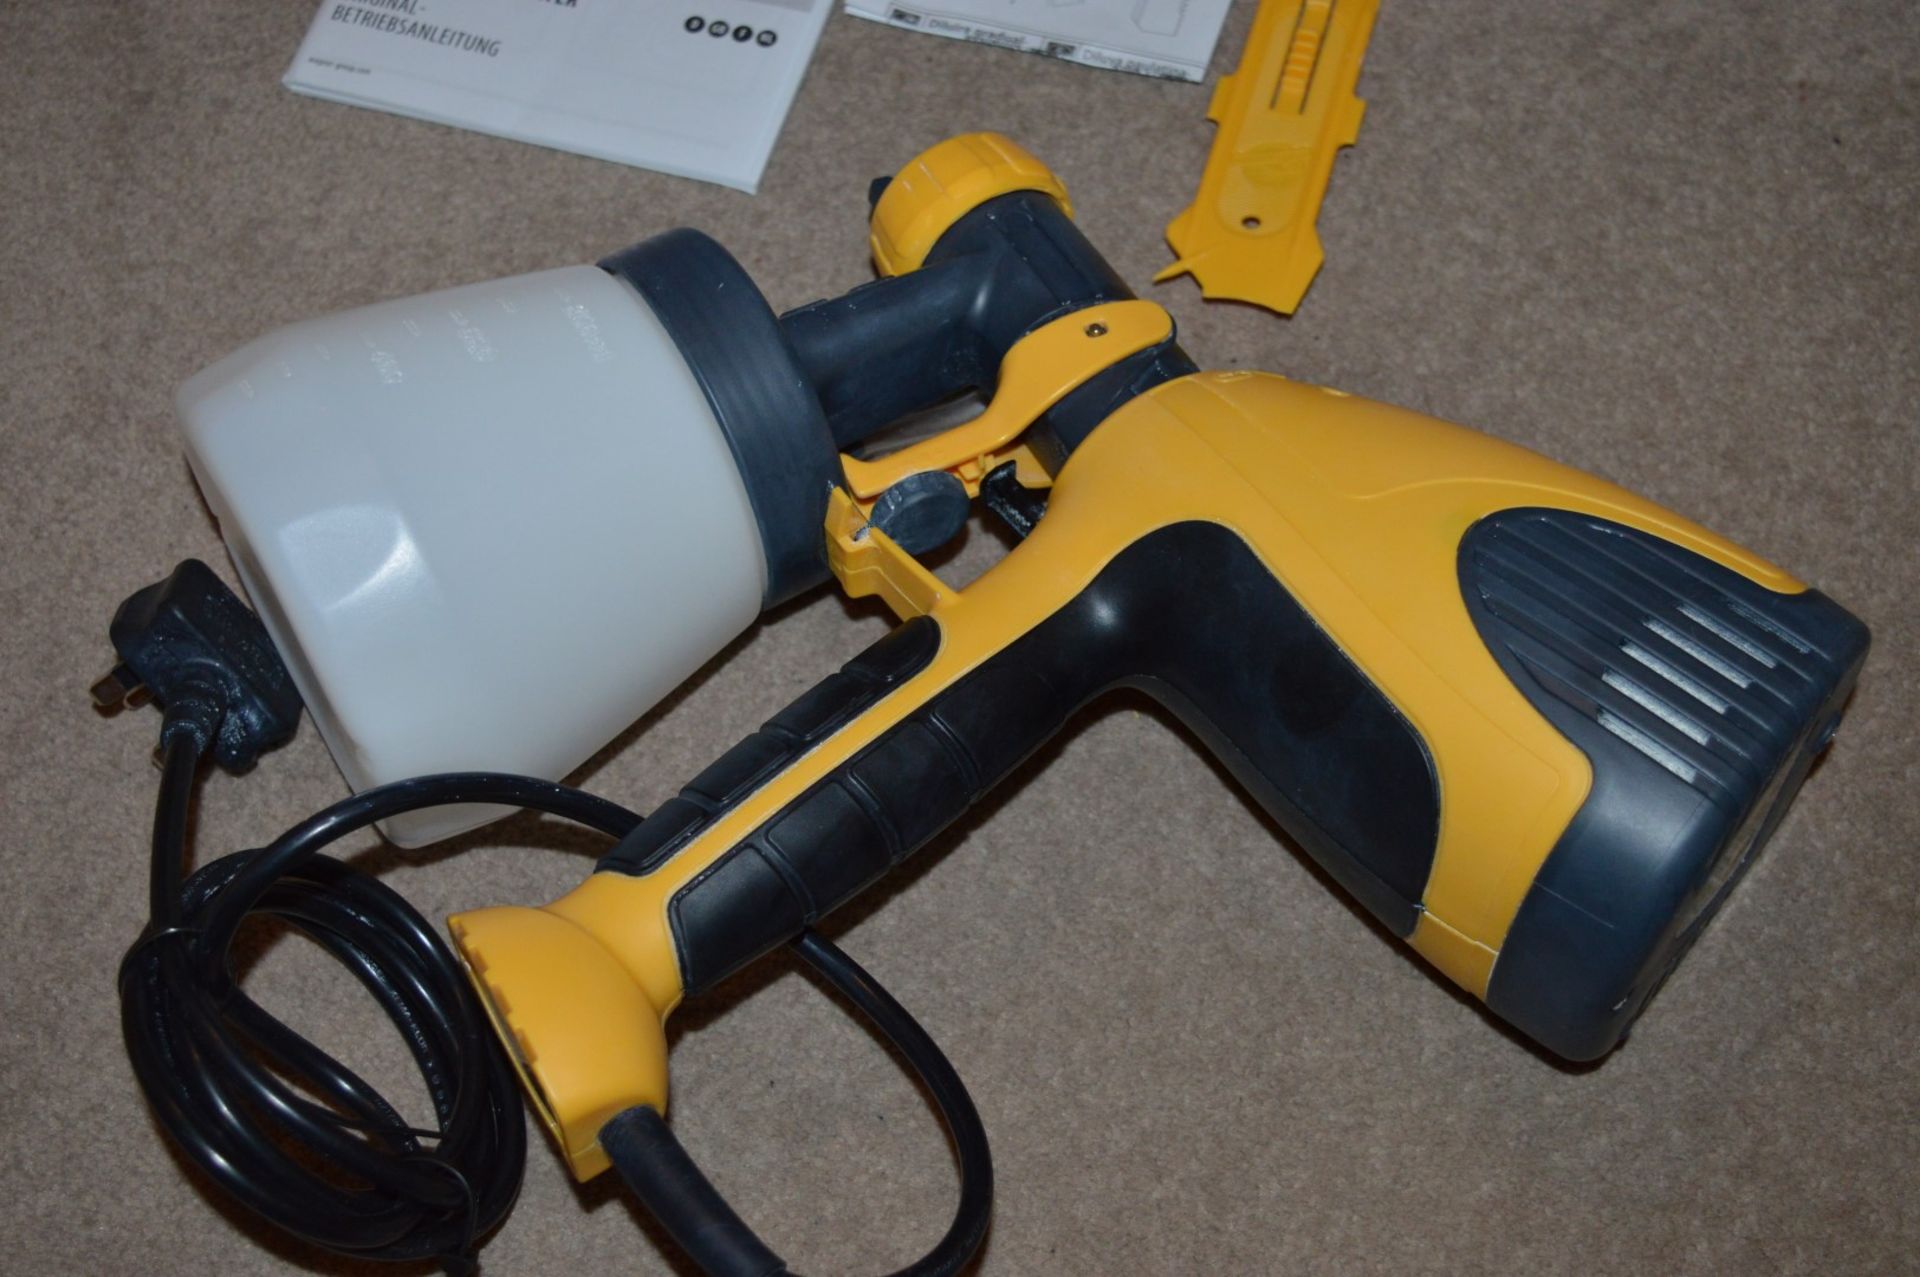 1 x Wagner W100 Wood & Metal Paint Sprayer - Good Working Order - CL010 - Ref J903 - Image 2 of 4